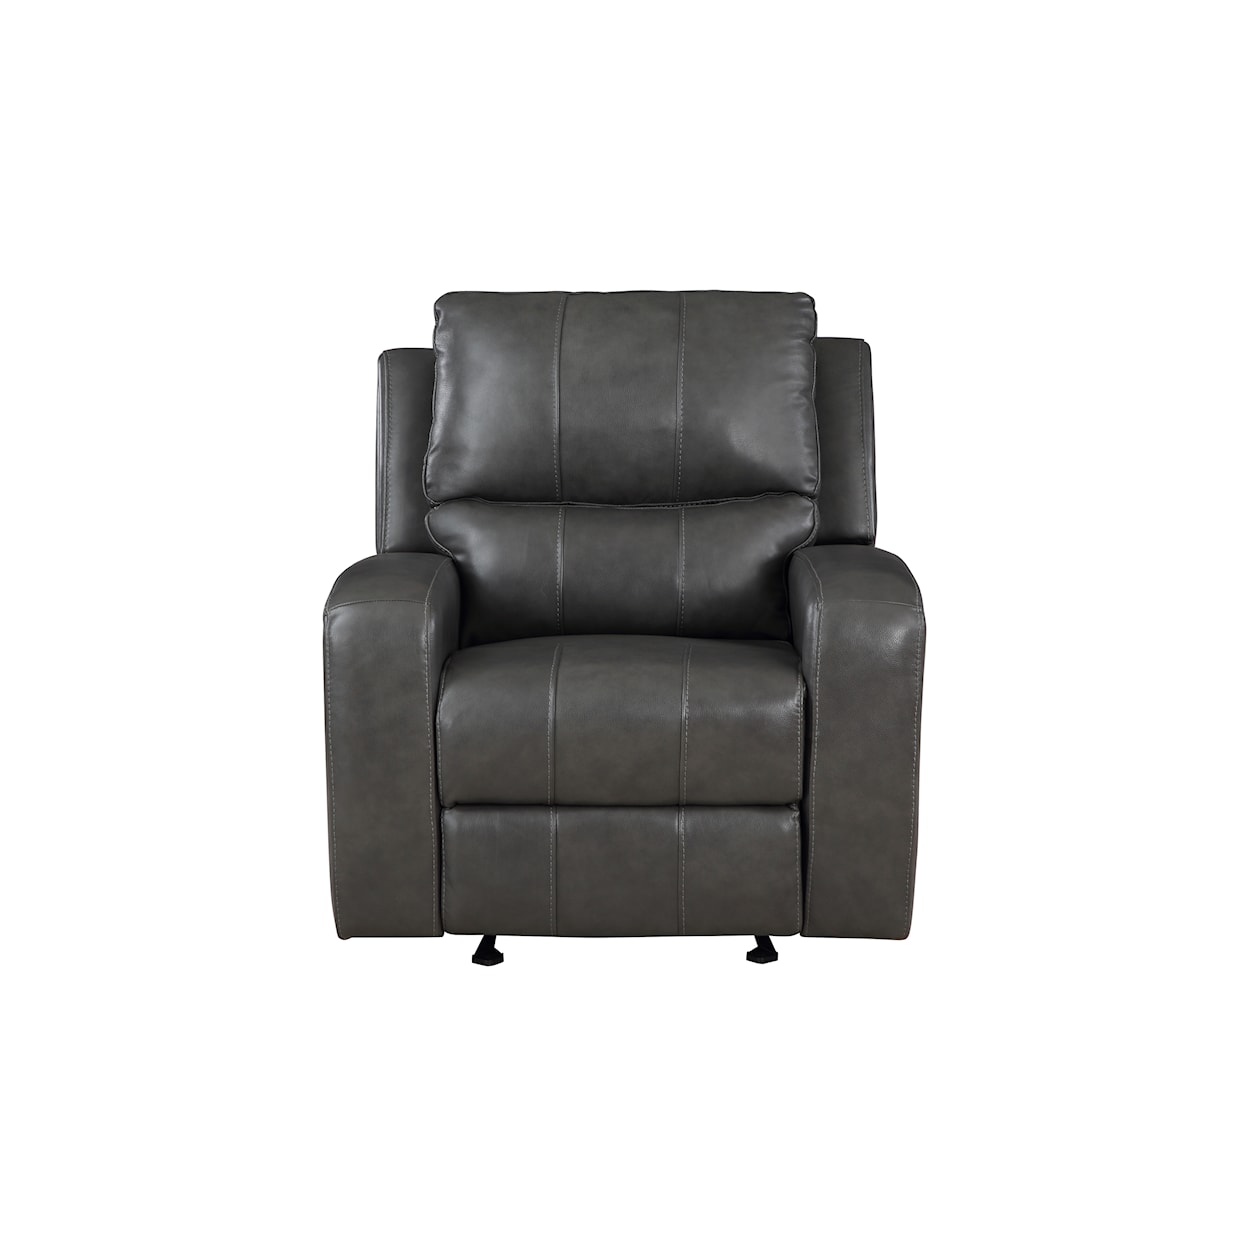 New Classic Linton Leather Power Glider Recliner